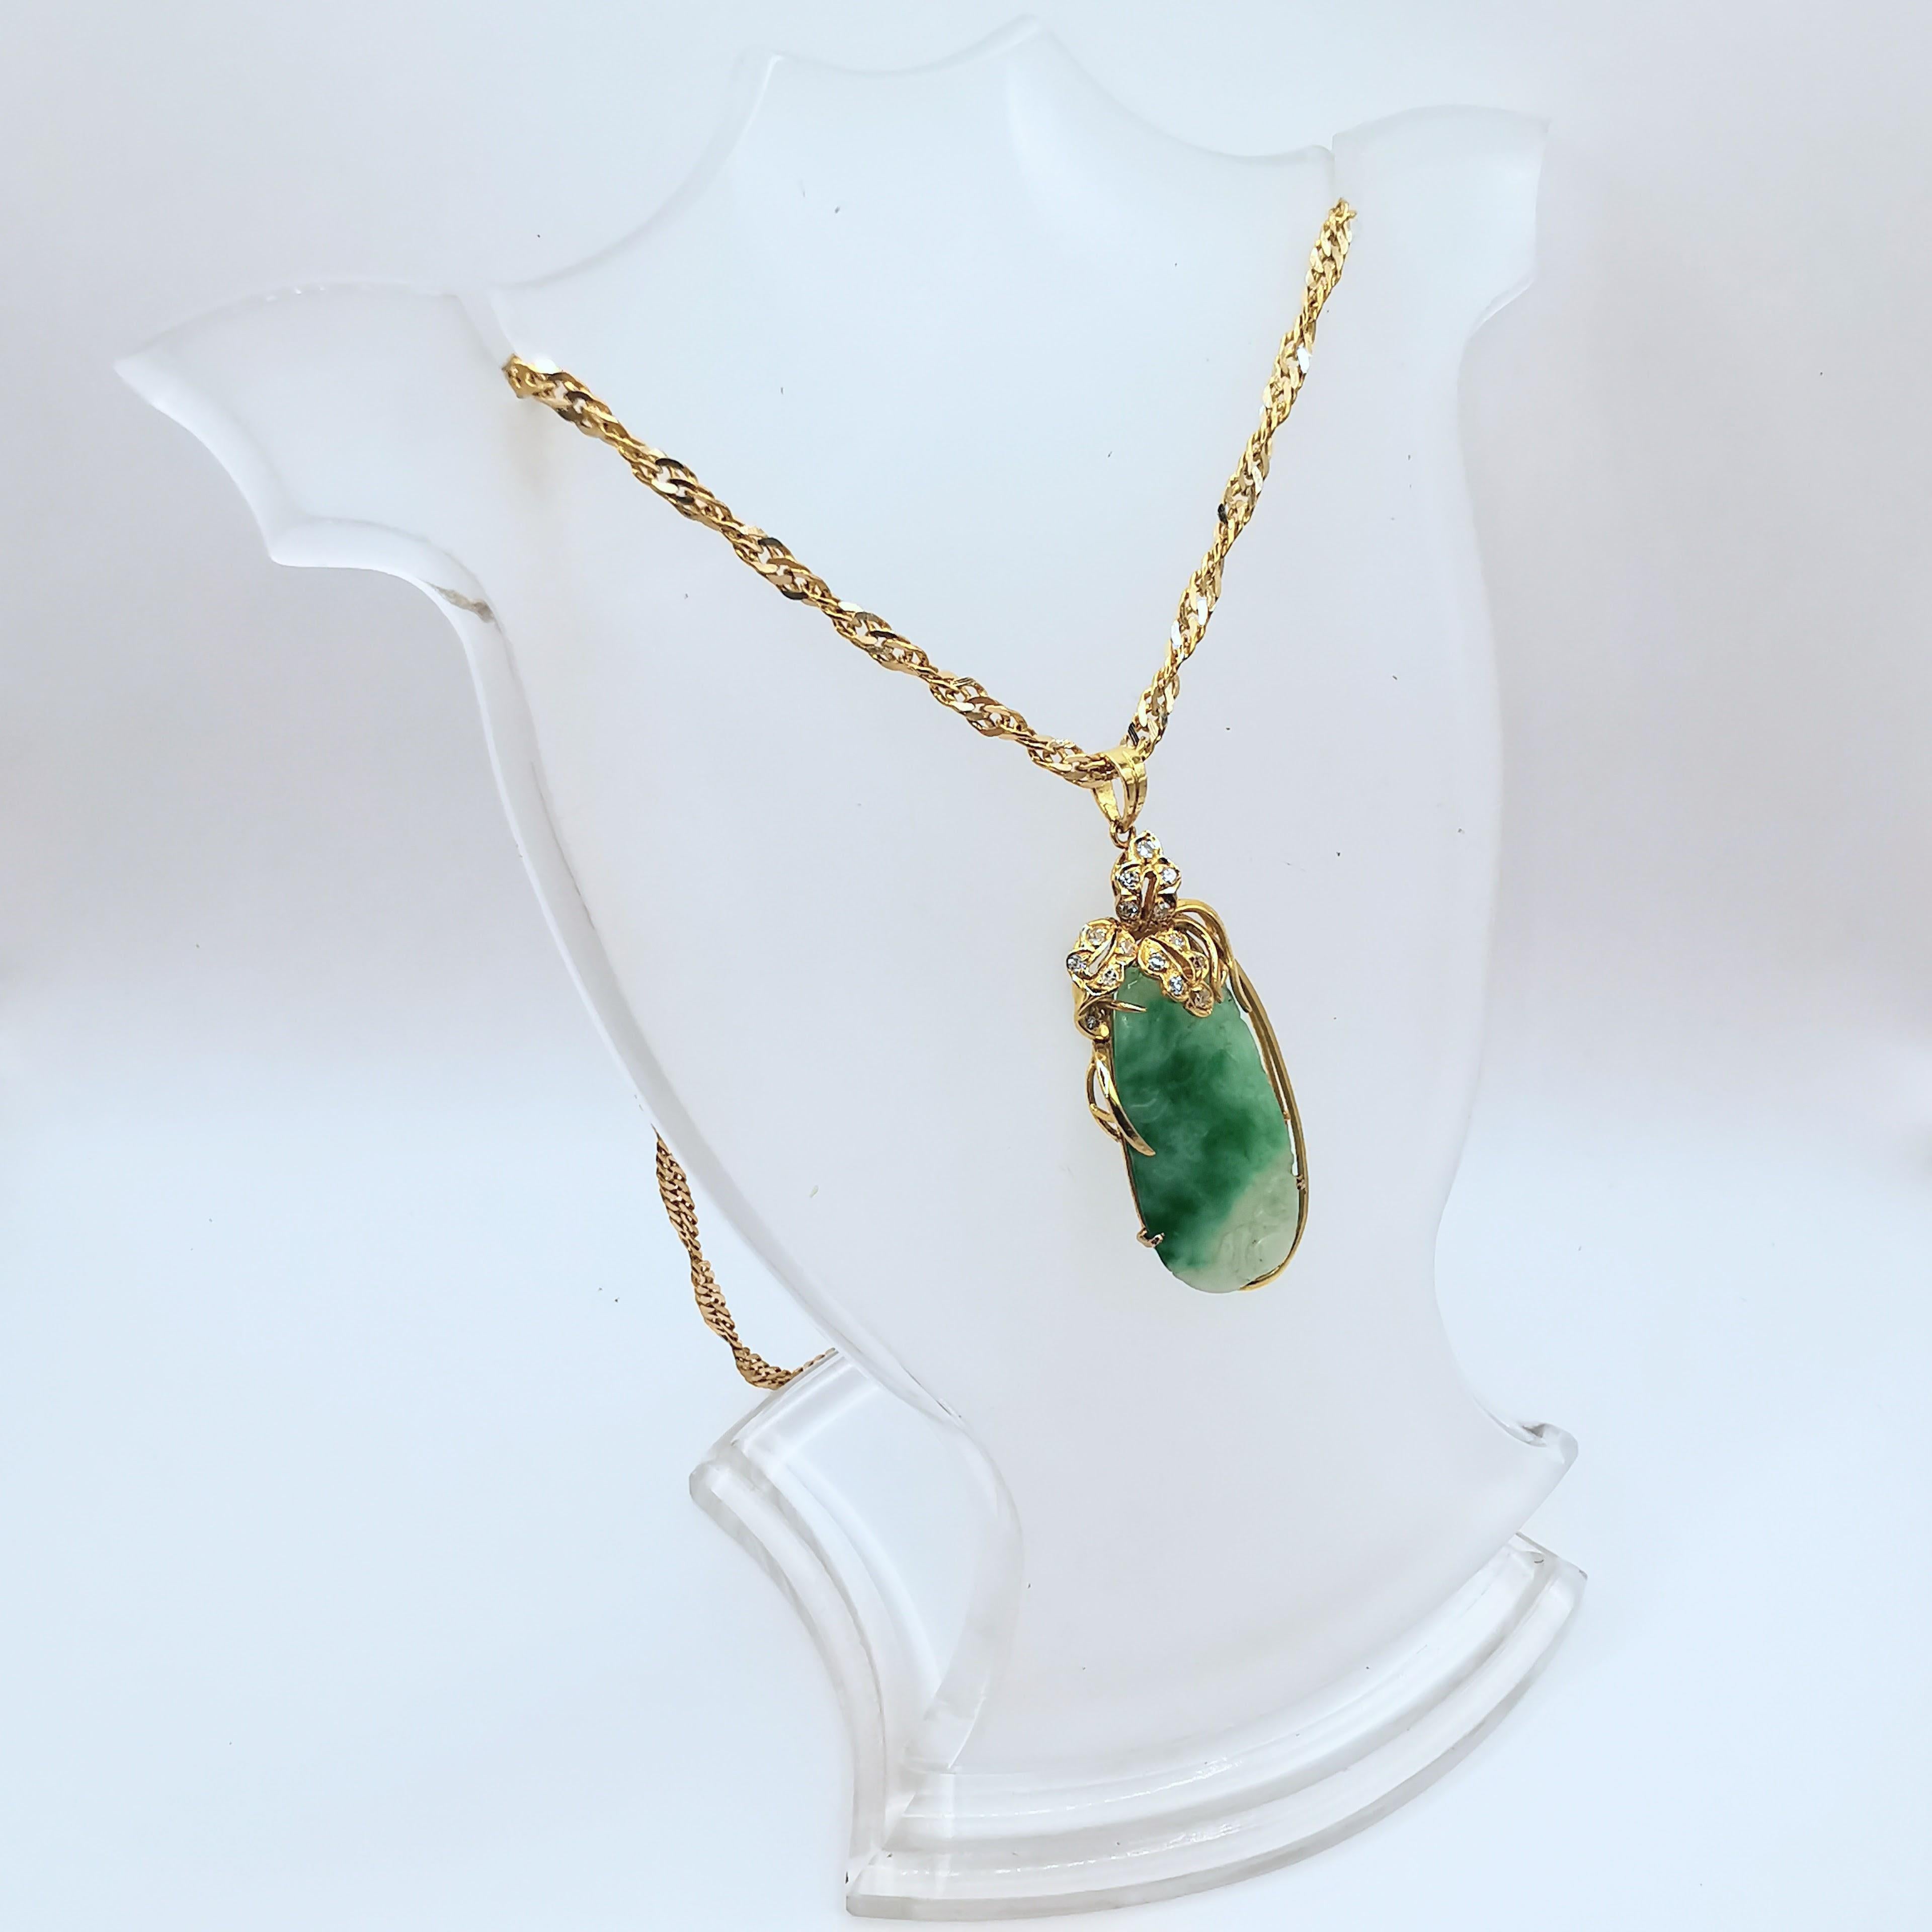 Introducing our stunning Vintage Carved Natural Jadeite Jade and Diamond Pendant, crafted in 14K yellow gold. The pendant features a translucent green on white jadeite jade, intricately carved with a unique vintage design. The jadeite jade is a